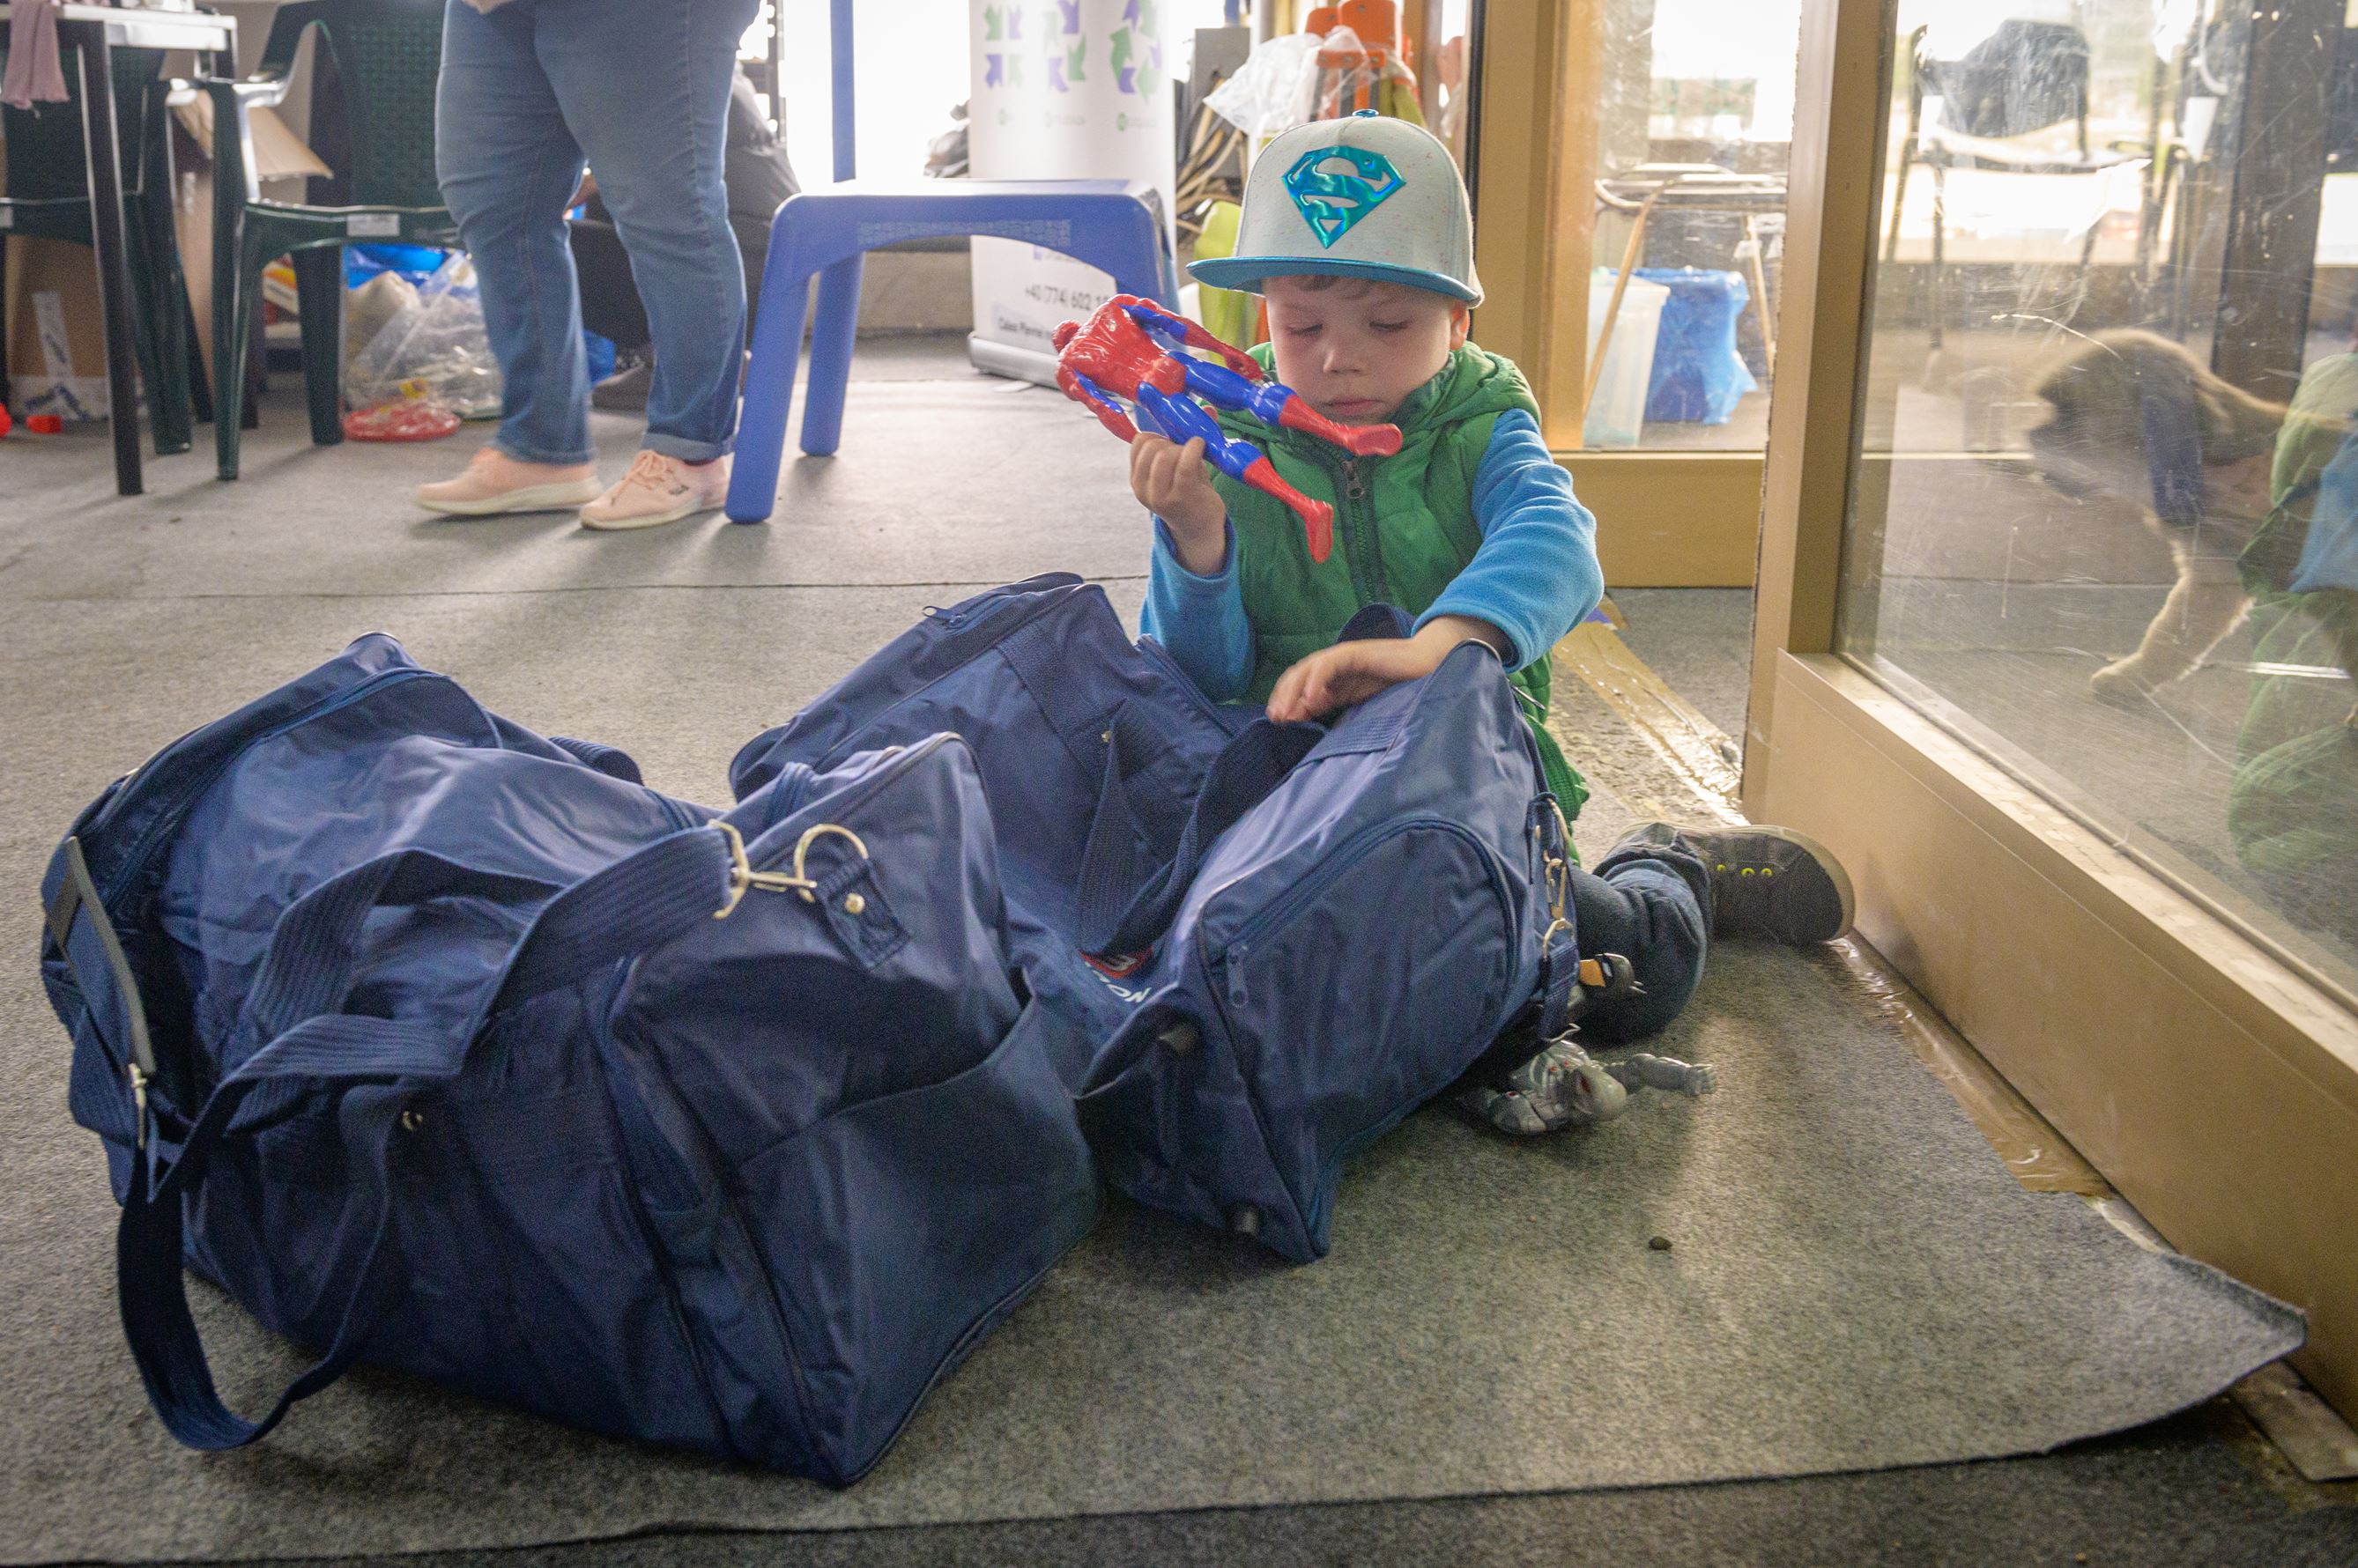 Ukrainian refugee child adds a toy to the family’s bags of supplies from RomExpo in Romania.